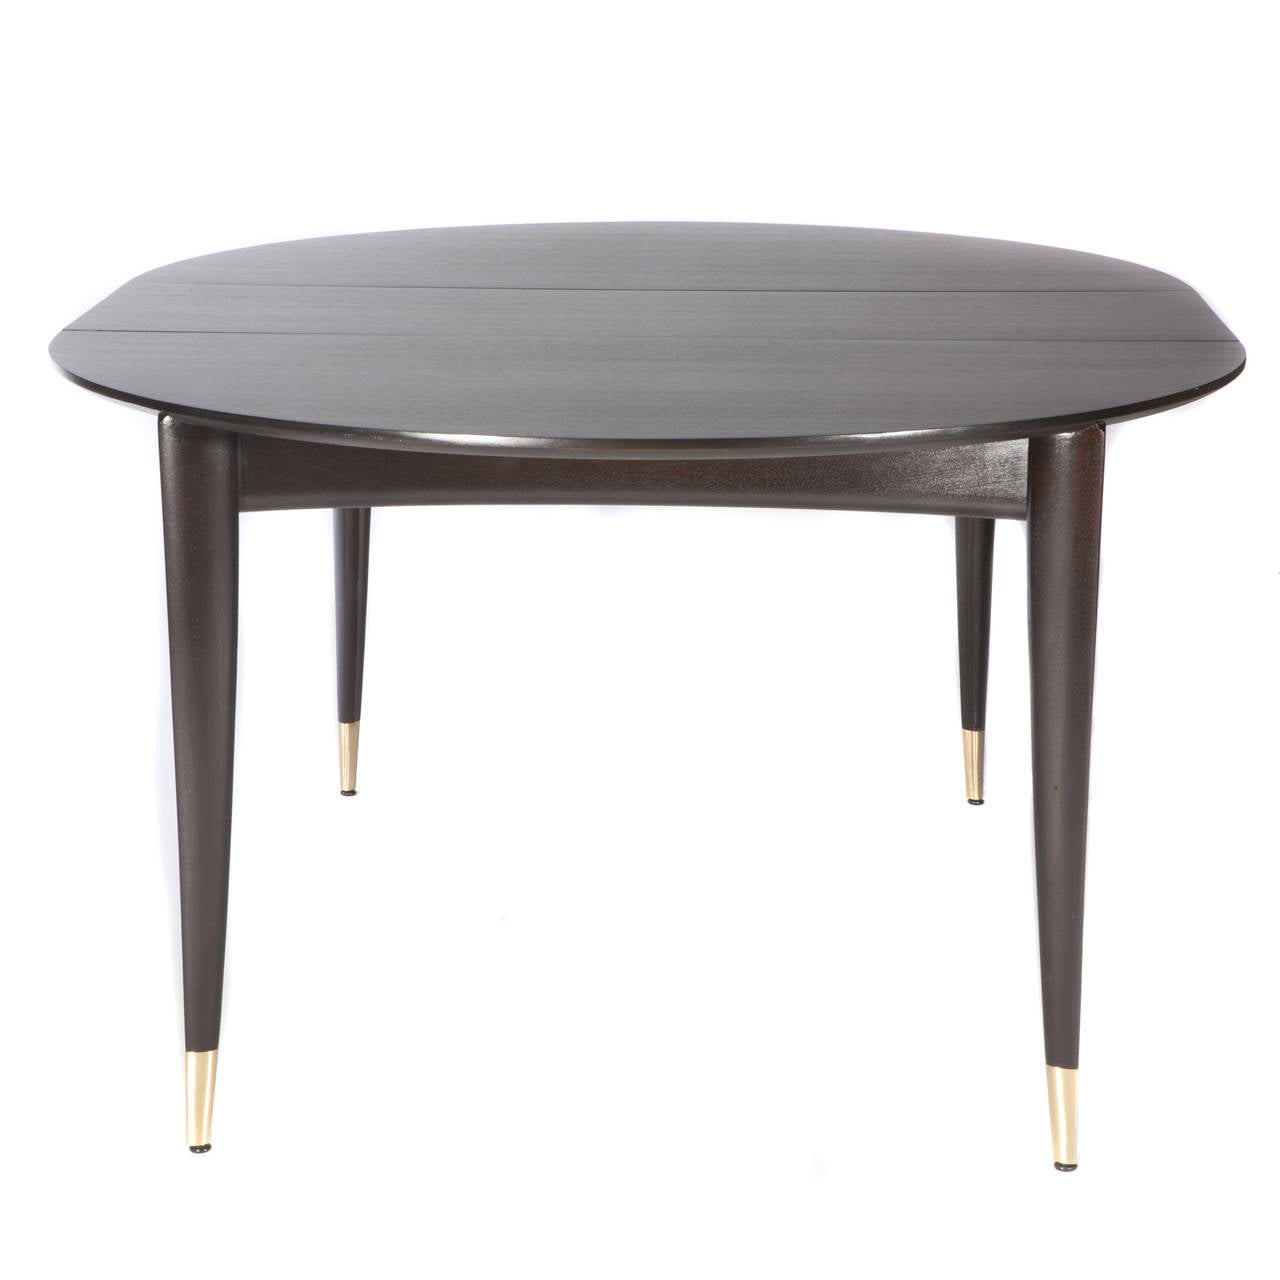 Elegant and Classic Gio Ponti design features tapered legs capped in brass, circa 1950s. A single 14" leaf extends the table to 62". Singer & Sons label. Refinished in a dark chocolate brown. 

See this item in our Brooklyn showroom,